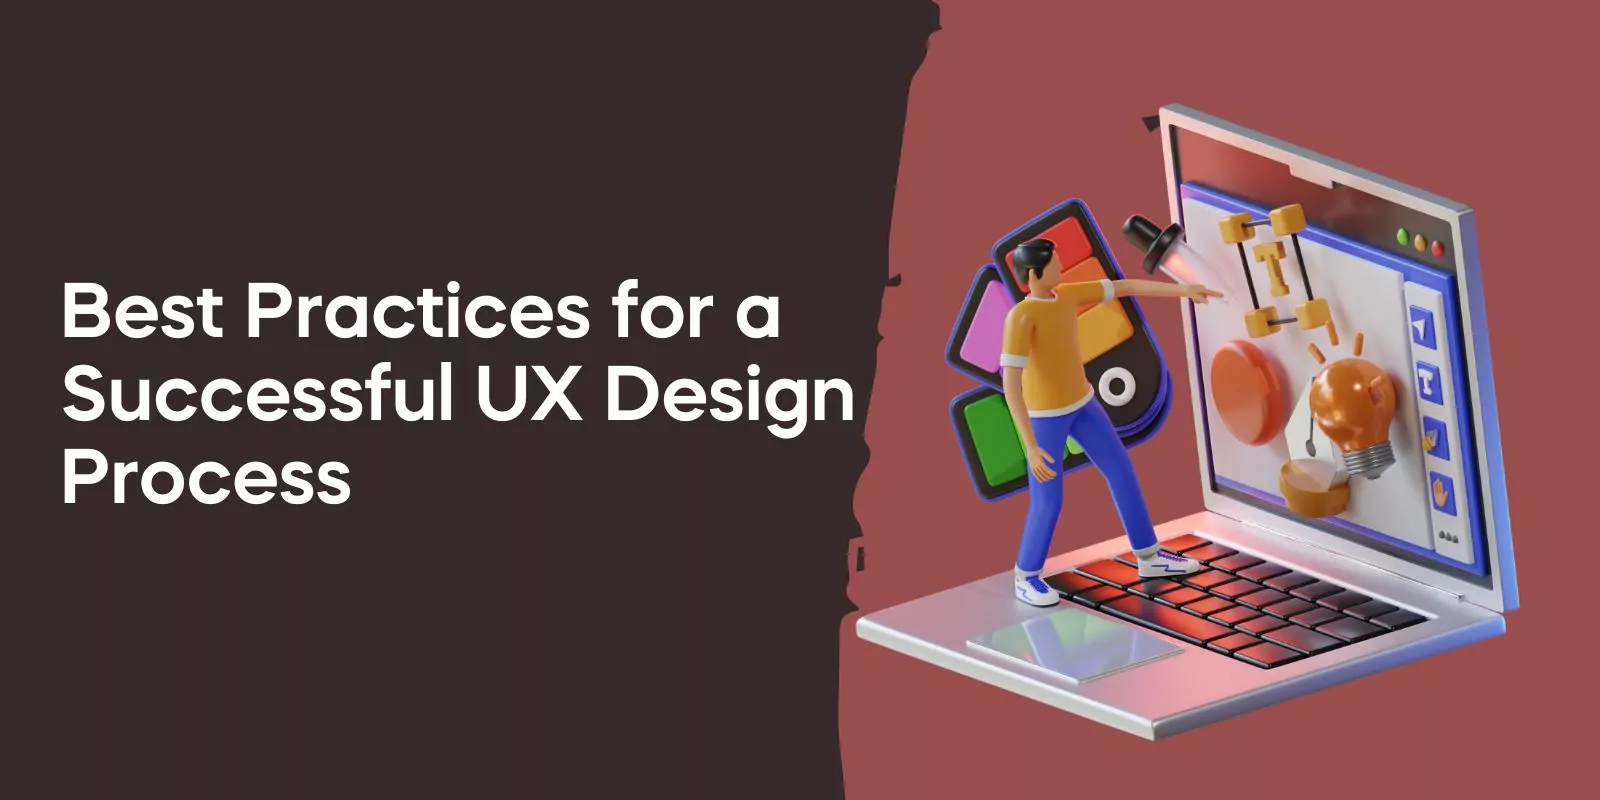 Best Practices for a Successful UX Design Process